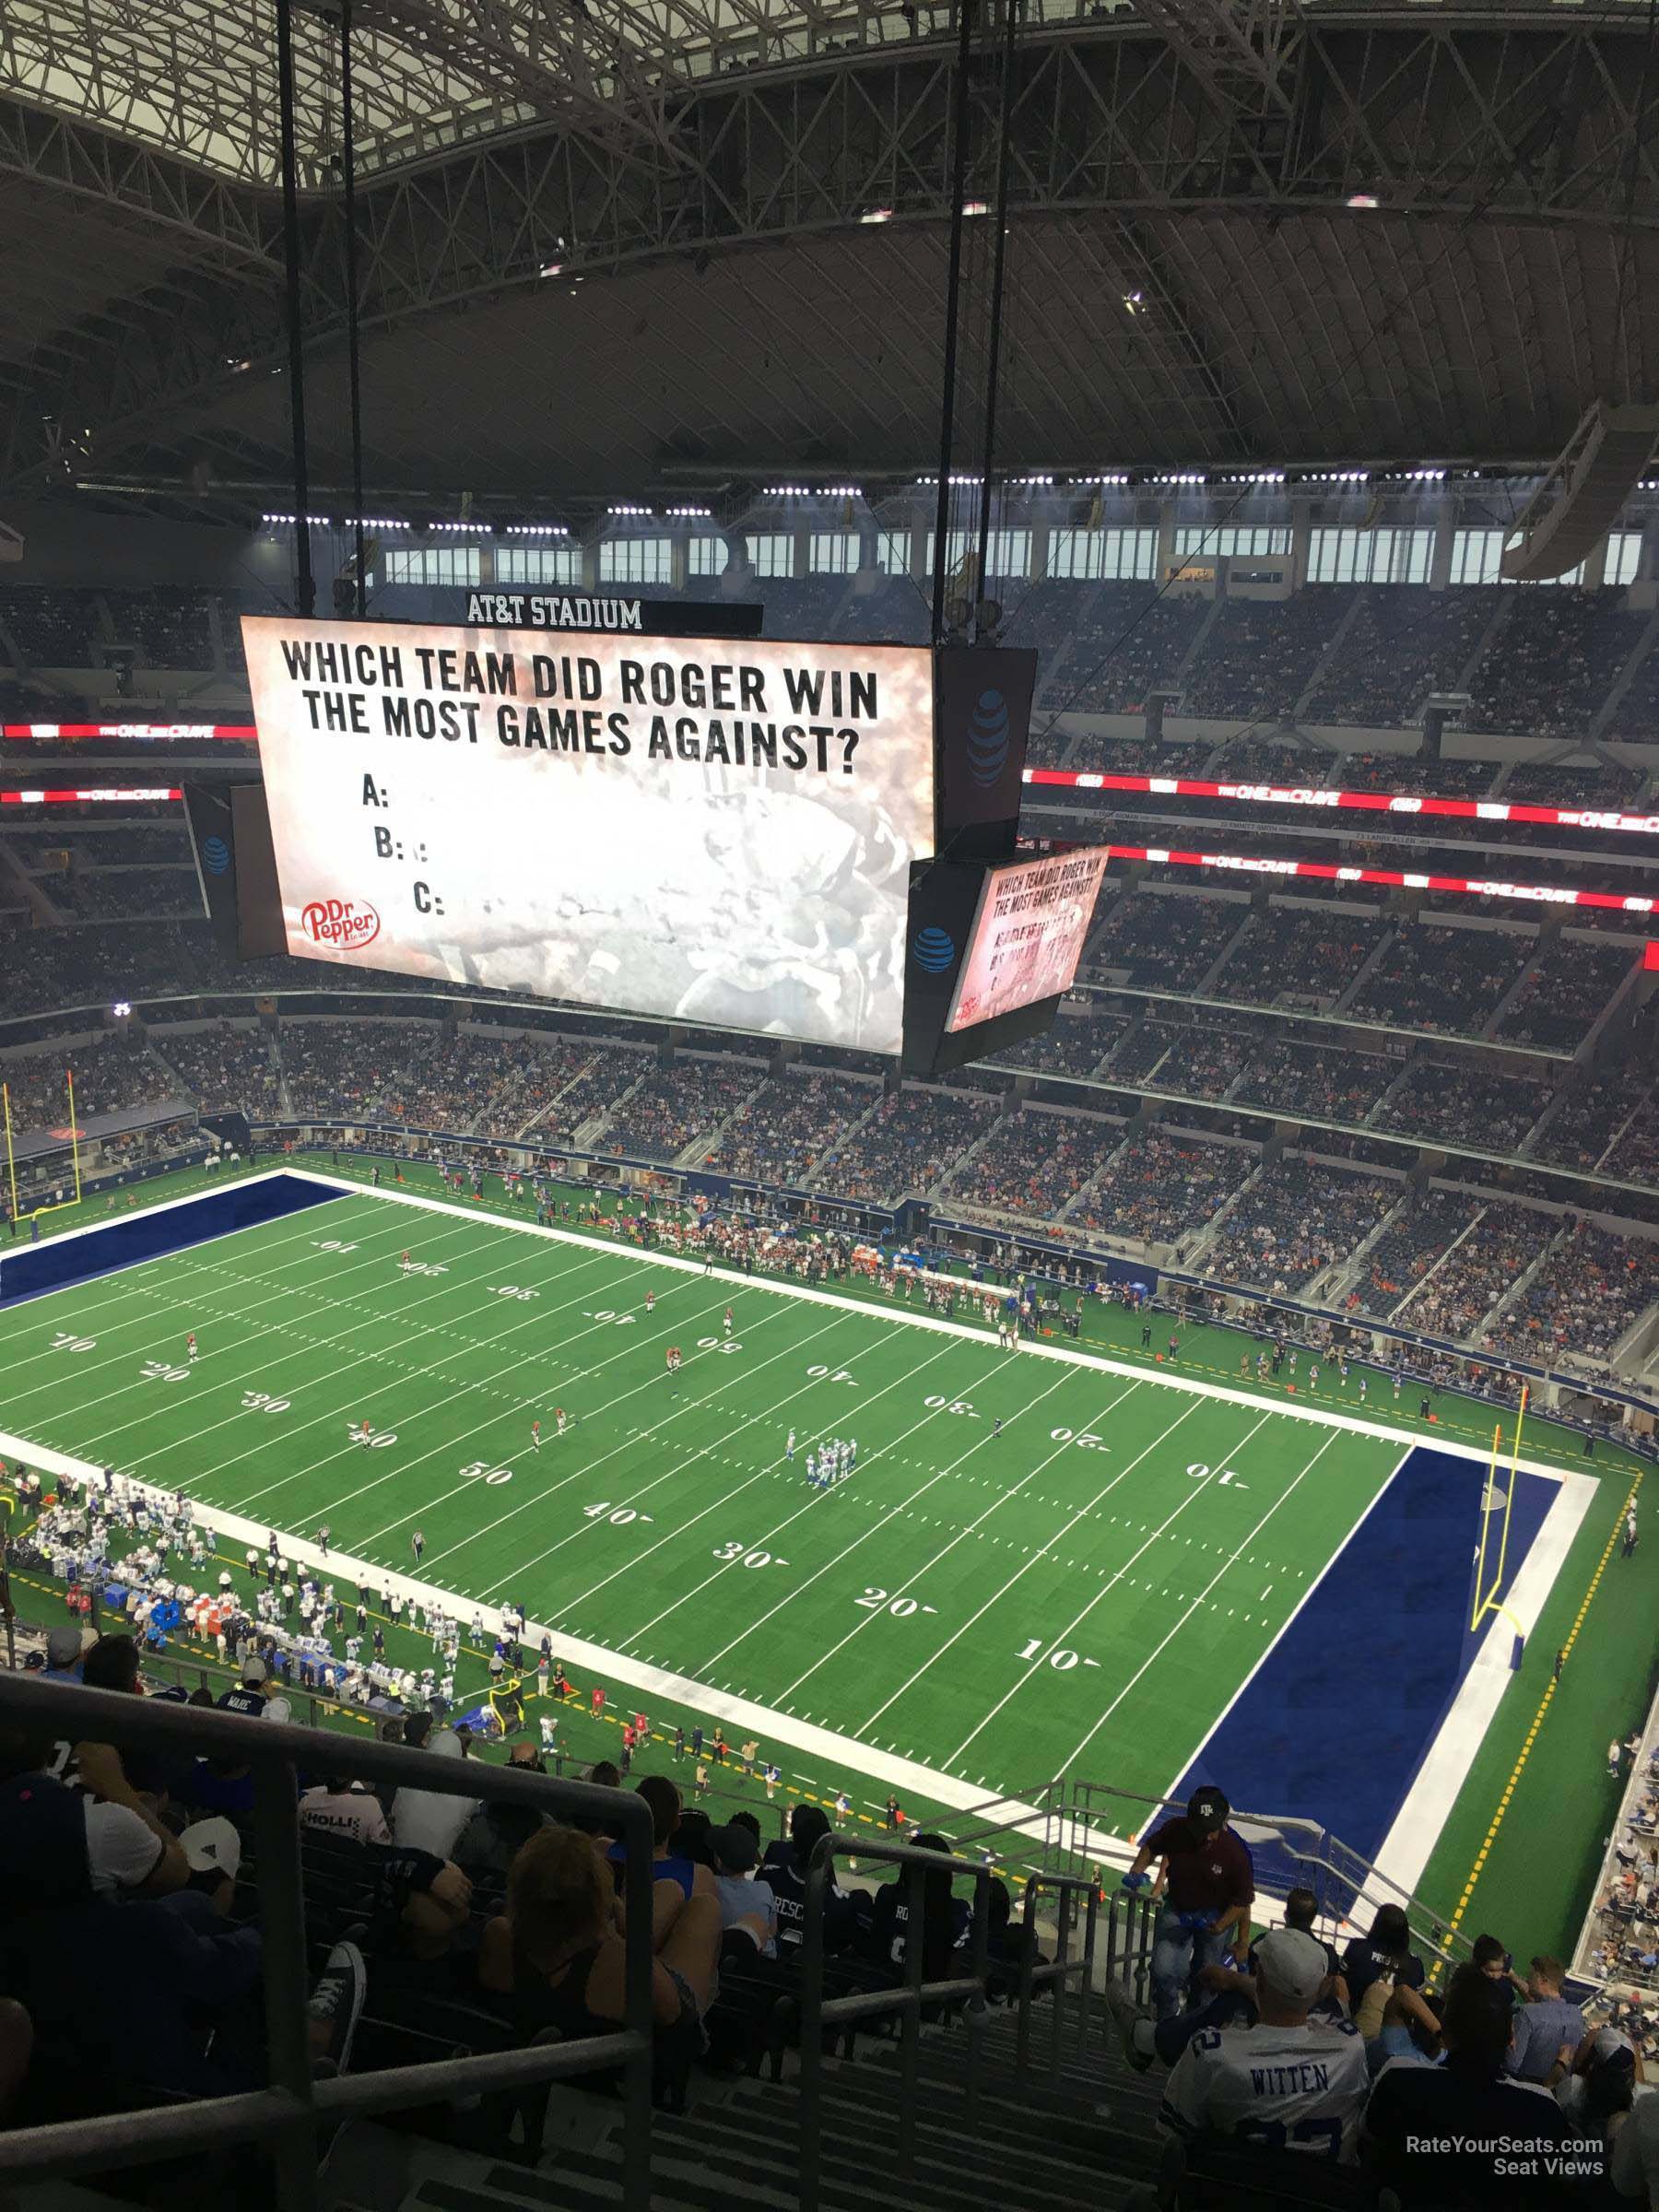 section 408, row 22 seat view  for football - at&t stadium (cowboys stadium)